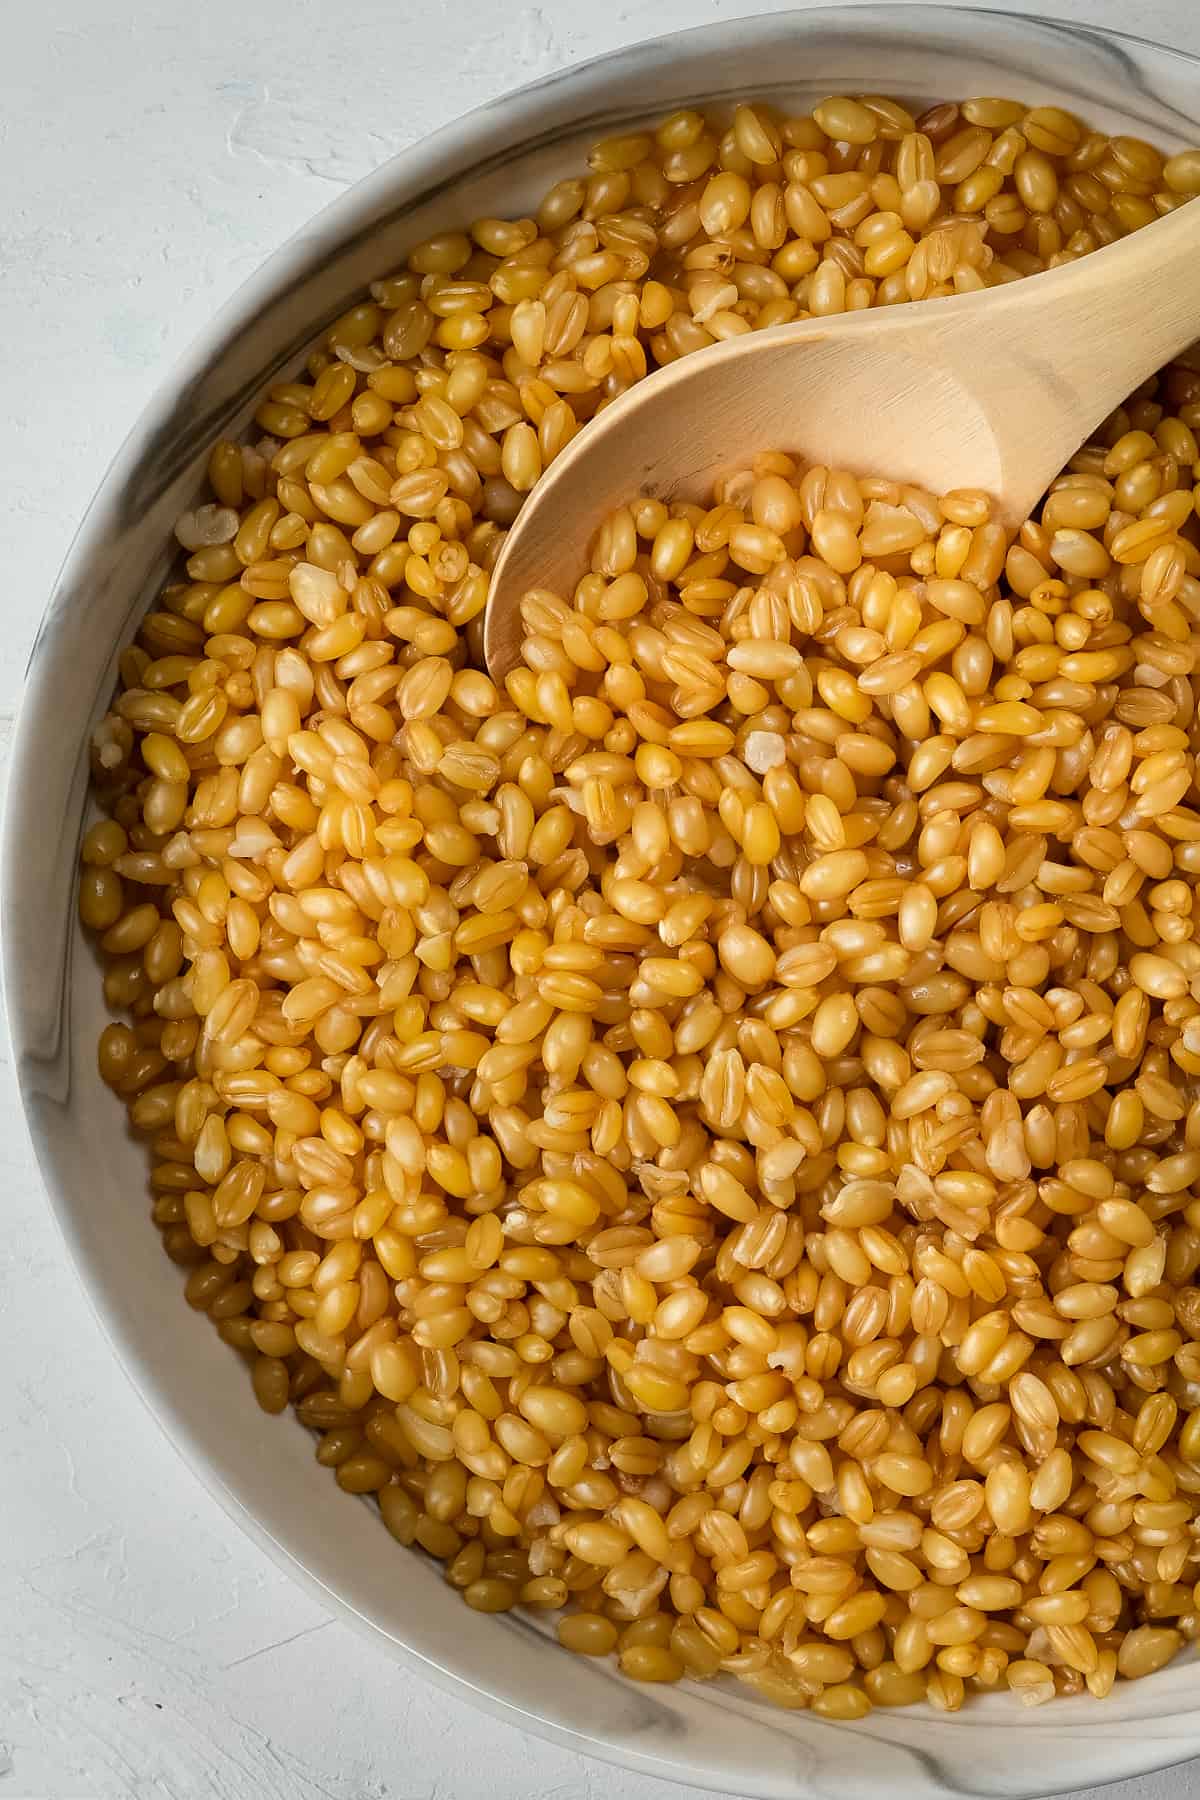 Cooked red wheat berries in a white bowl and a wooden spoon inside it.